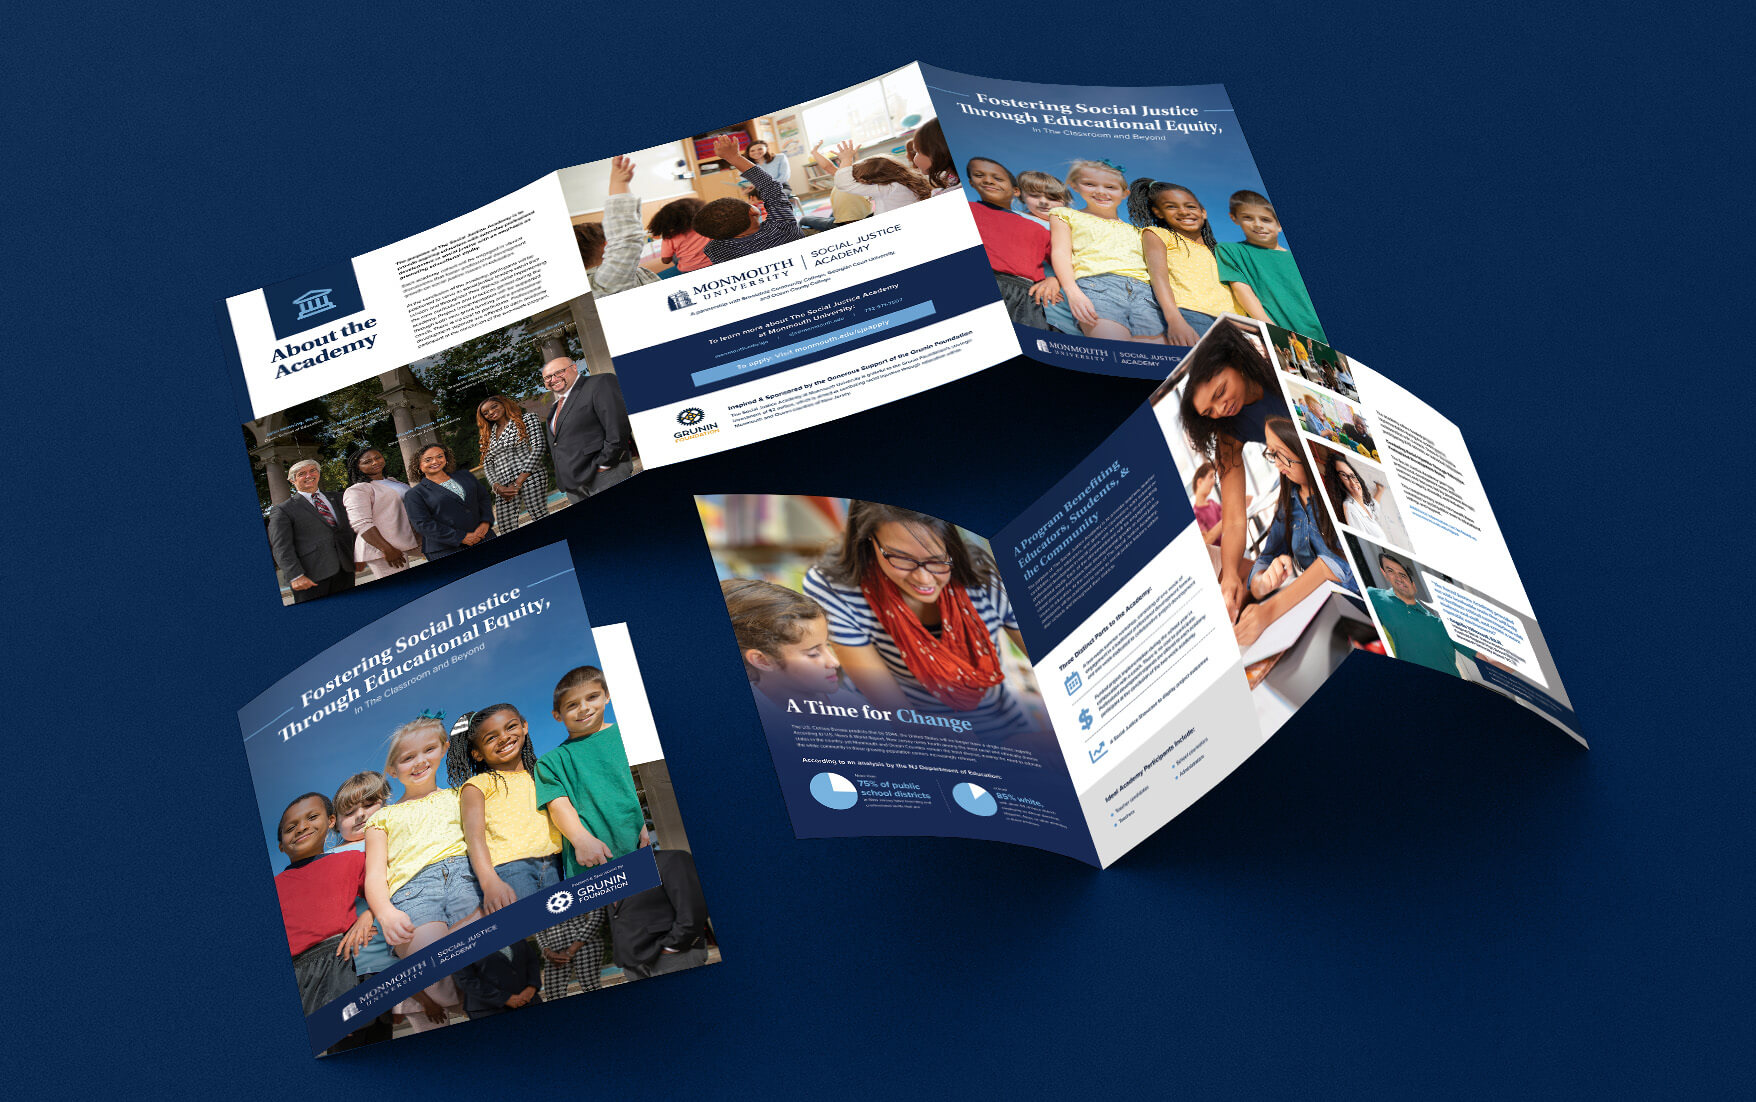 The Monmouth University Social Justice Academy Branding